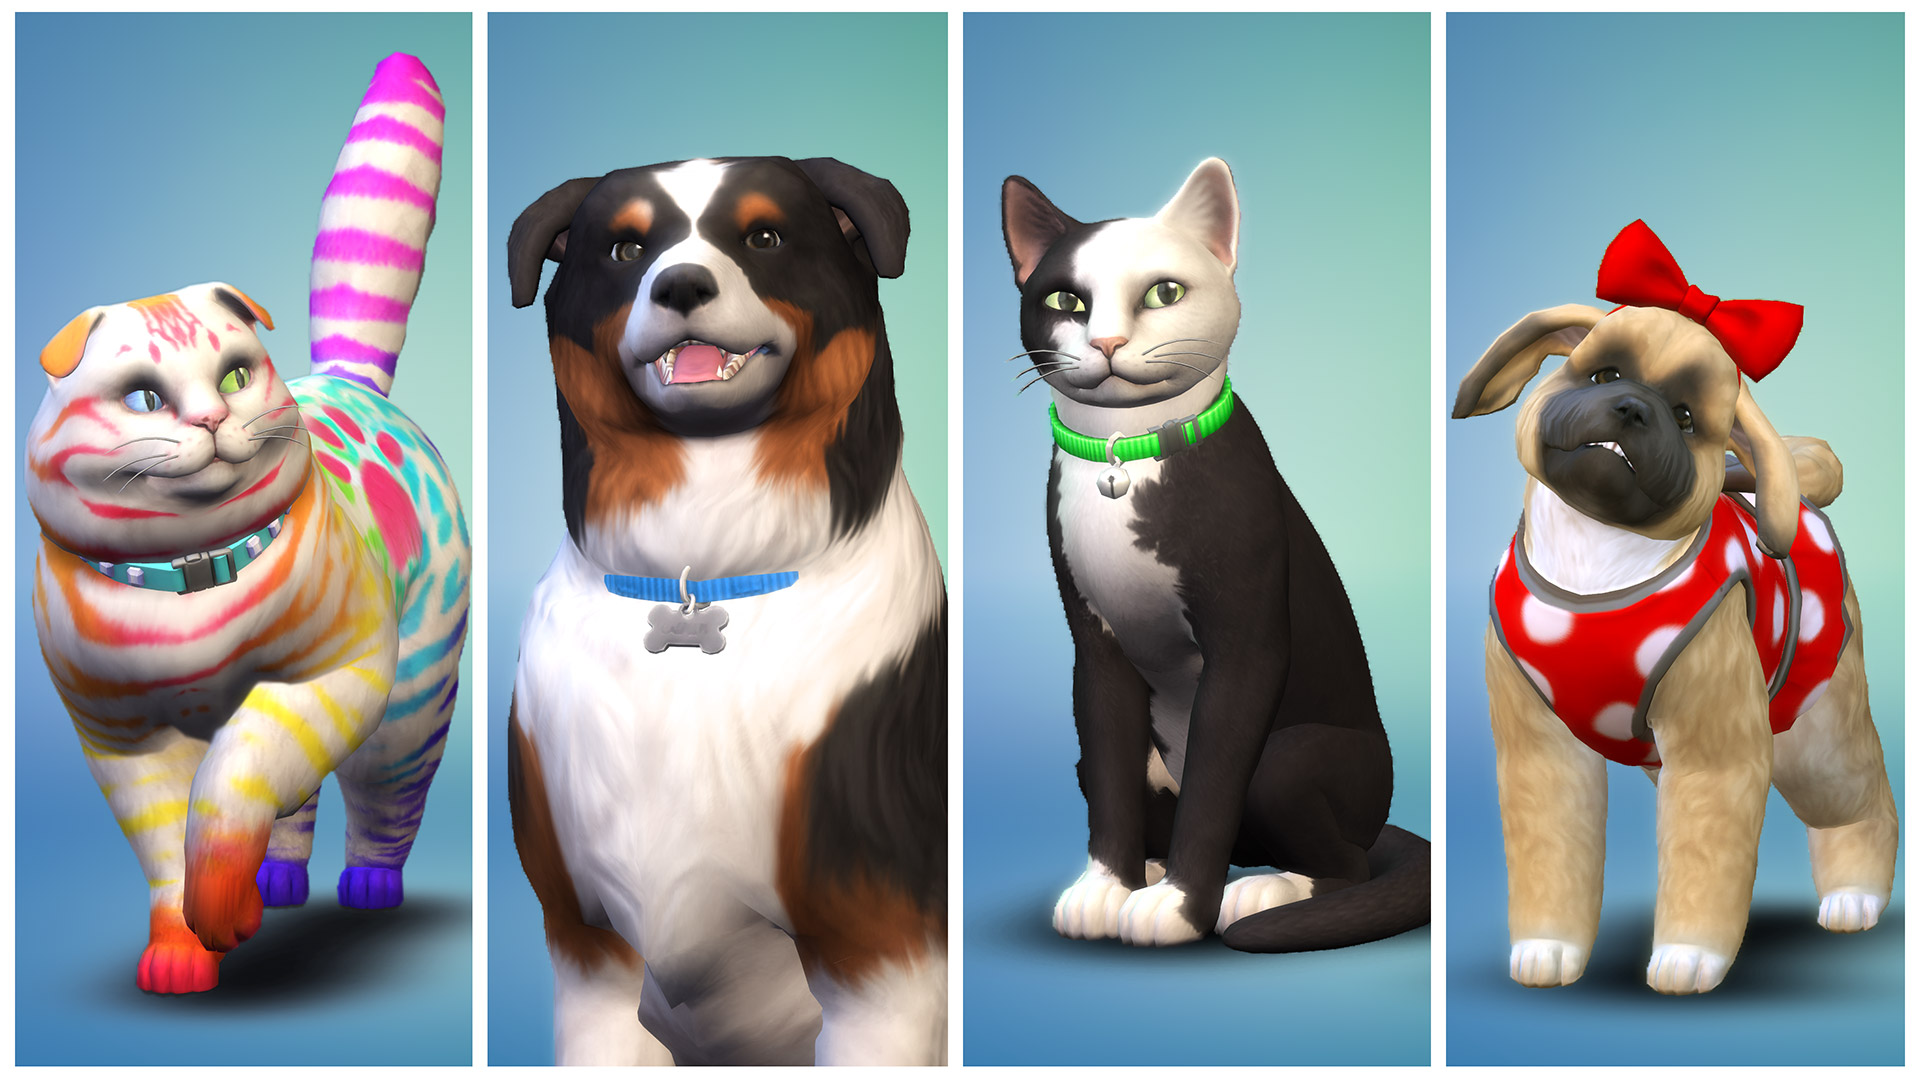 The Sims 4 Cats & Dogs announced on Gamescom 2017! - Sims ...